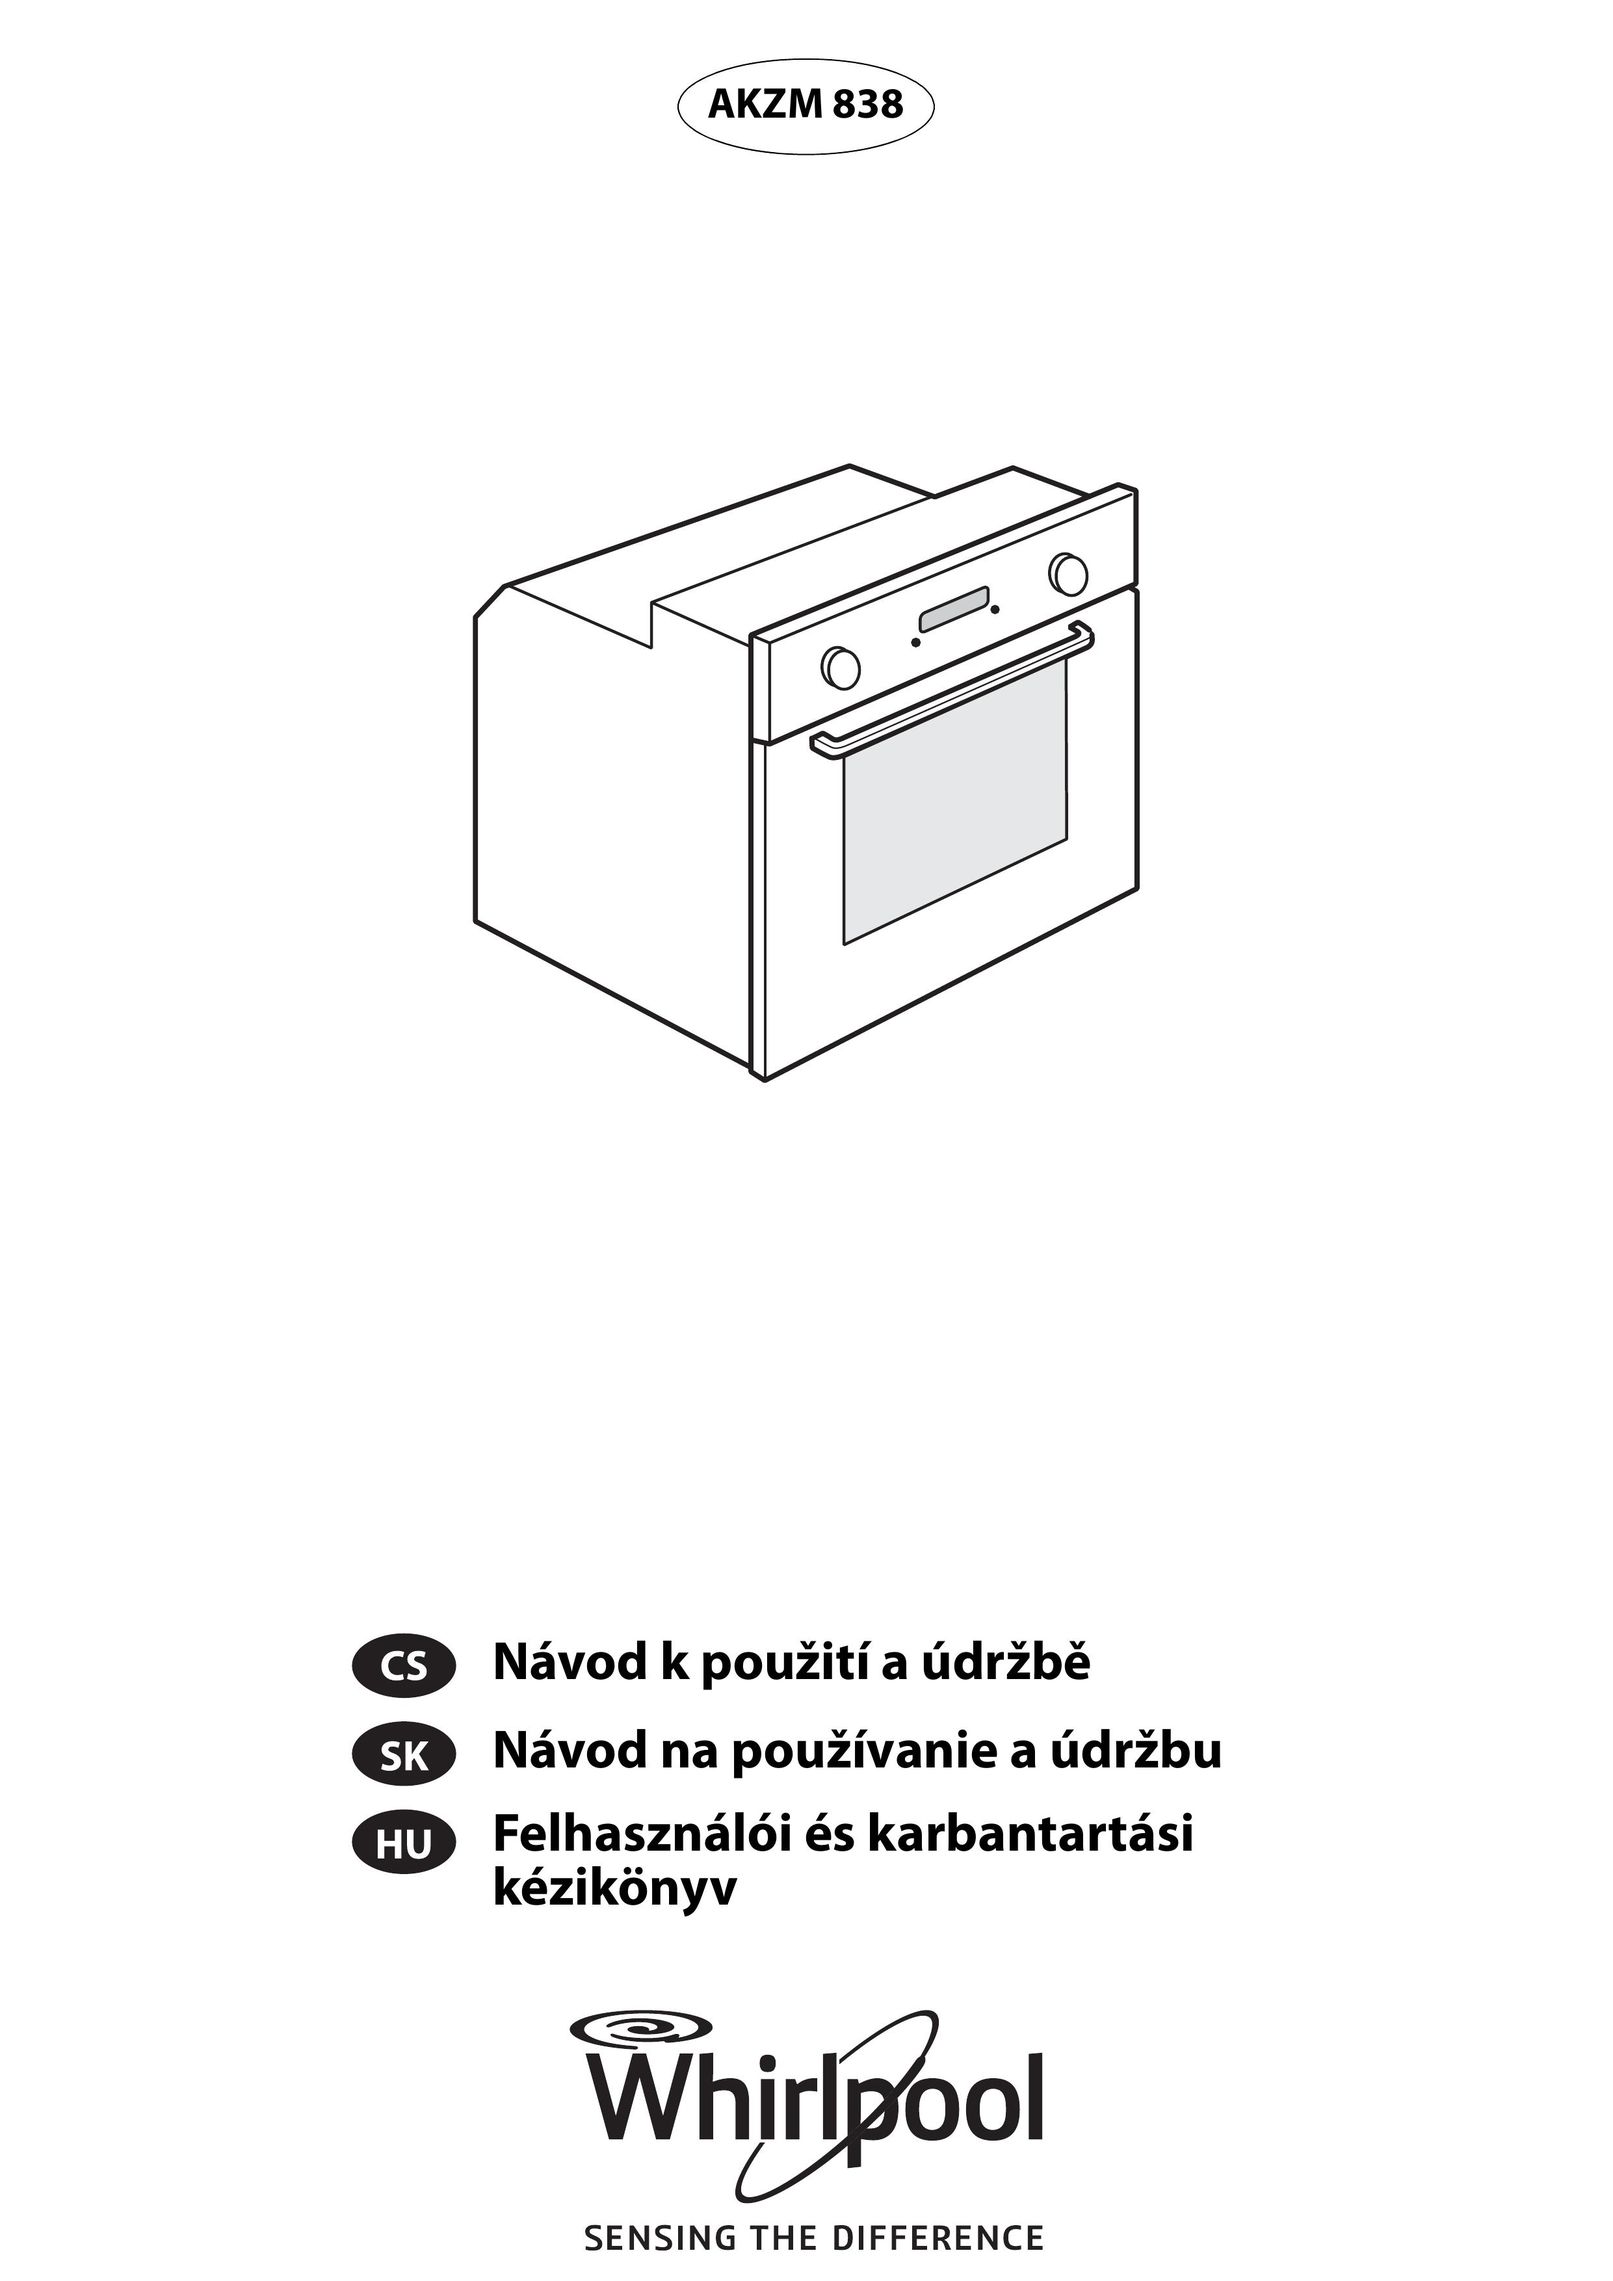 Whirlpool AKZM 838 Oven User Manual